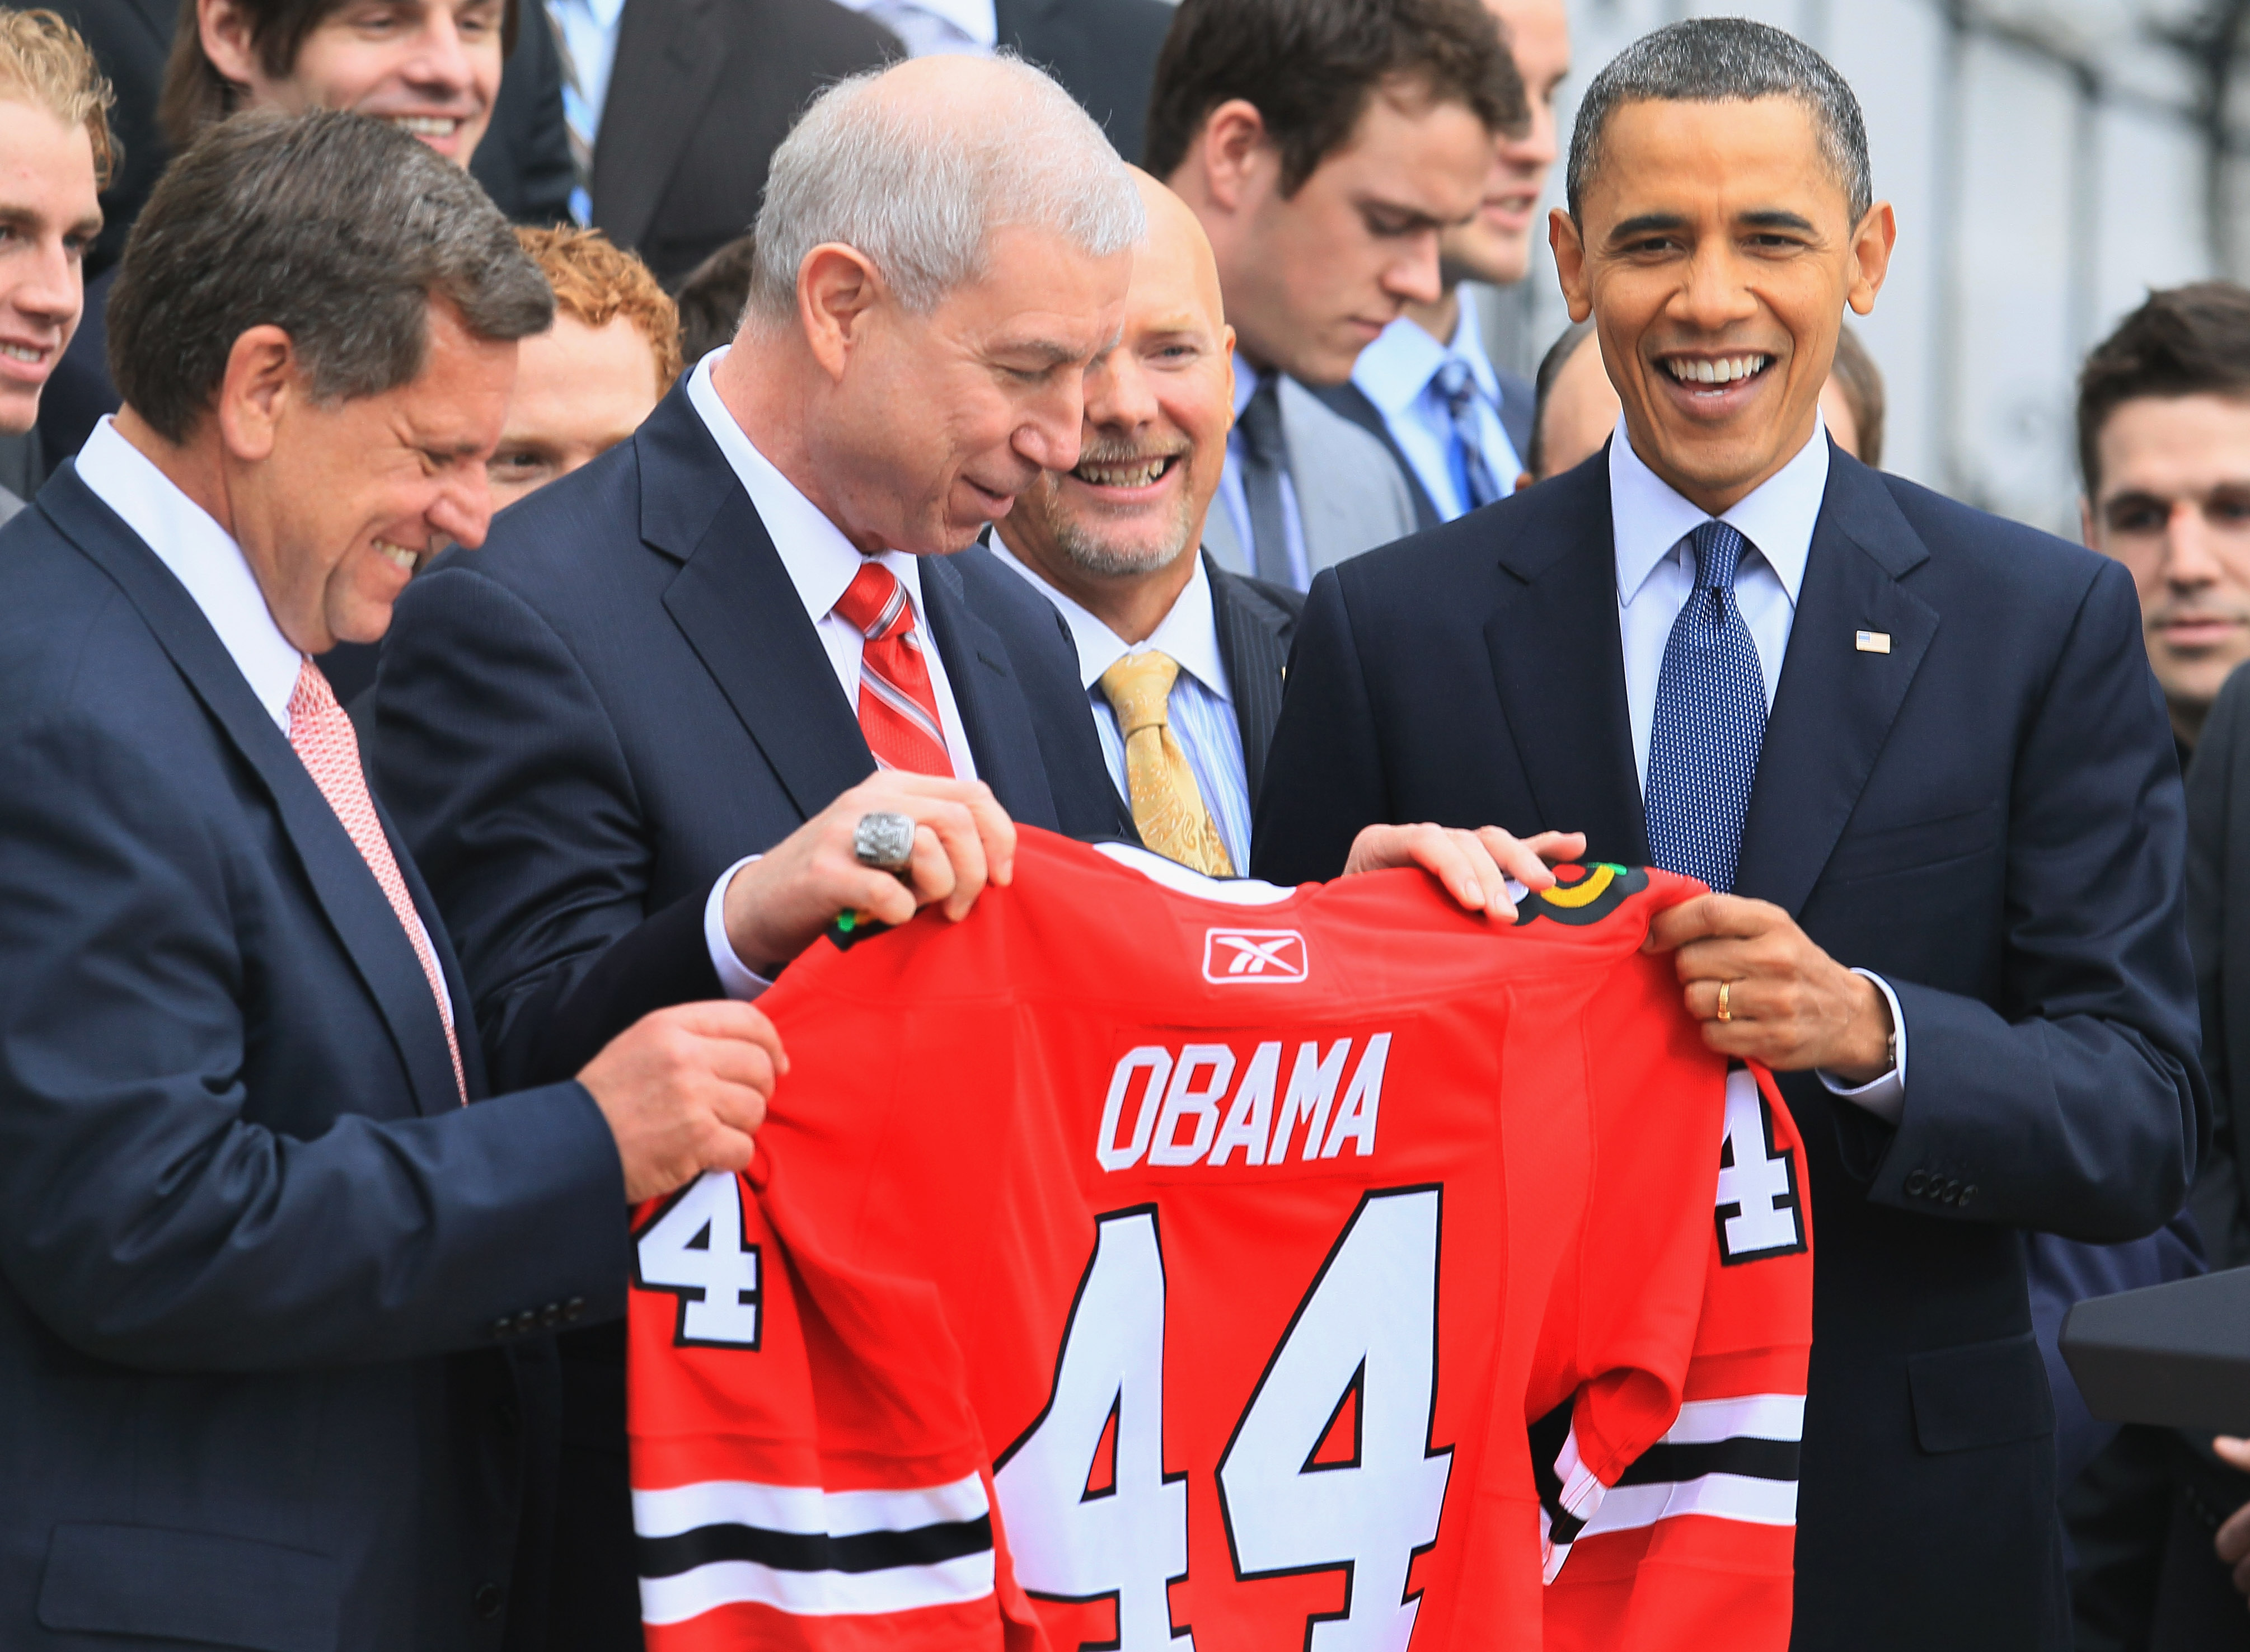 WASHINGTON, DC - MARCH 11:  U.S. President Barack Obama (R) is presented with a hockey jersey by Chicago Blackhawks President, John McDonough (C), during an event on the south lawn of the White House on March 11, 2011 in Washington, DC.  Obama hosted the